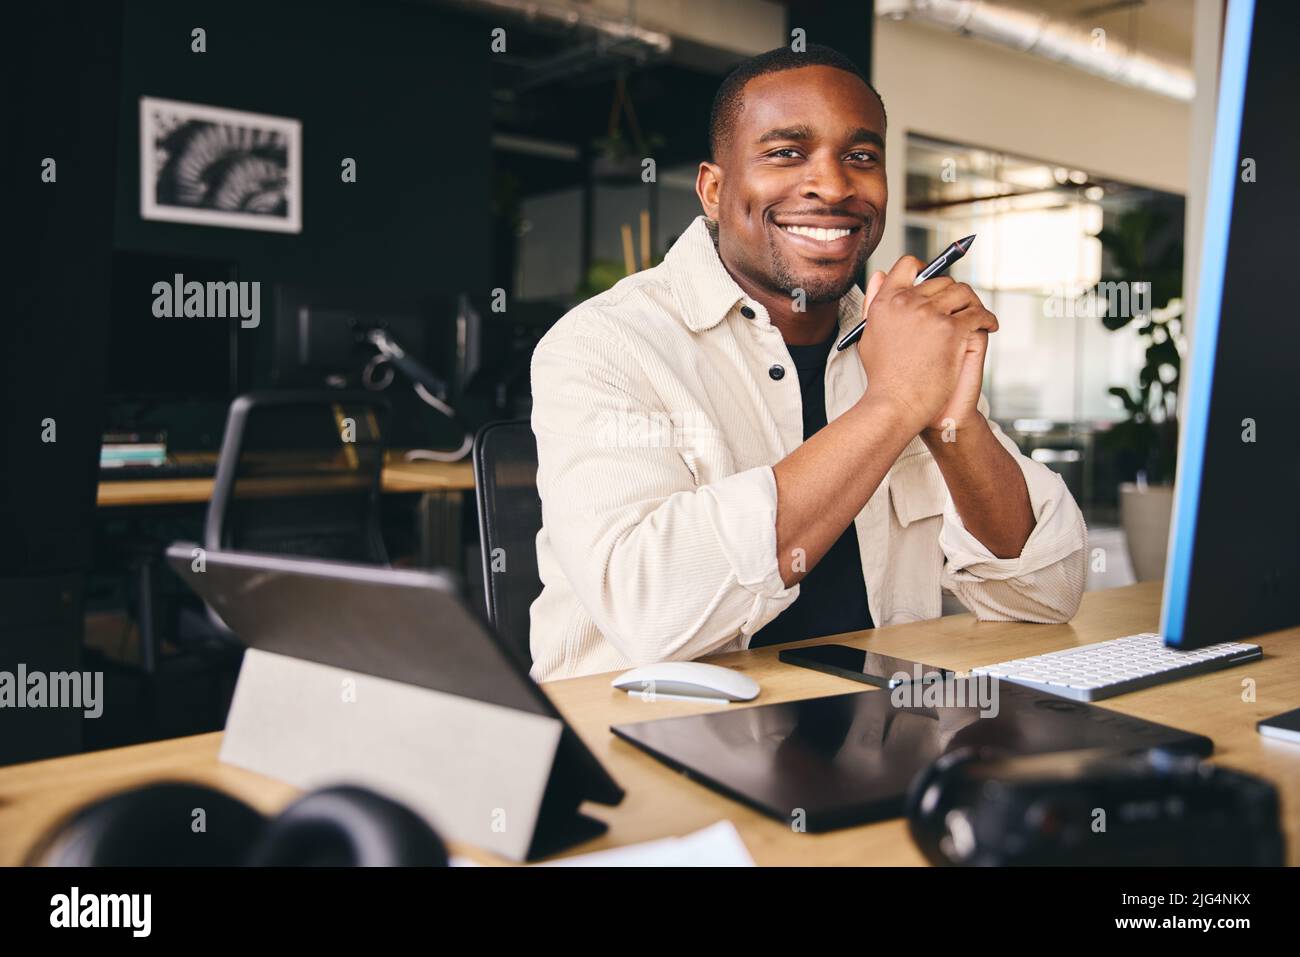 Young Black Male Advertising Marketing Or Design Creative In Modern Office Sitting At Desk Working On Computer Smiling to Camera Stock Photo